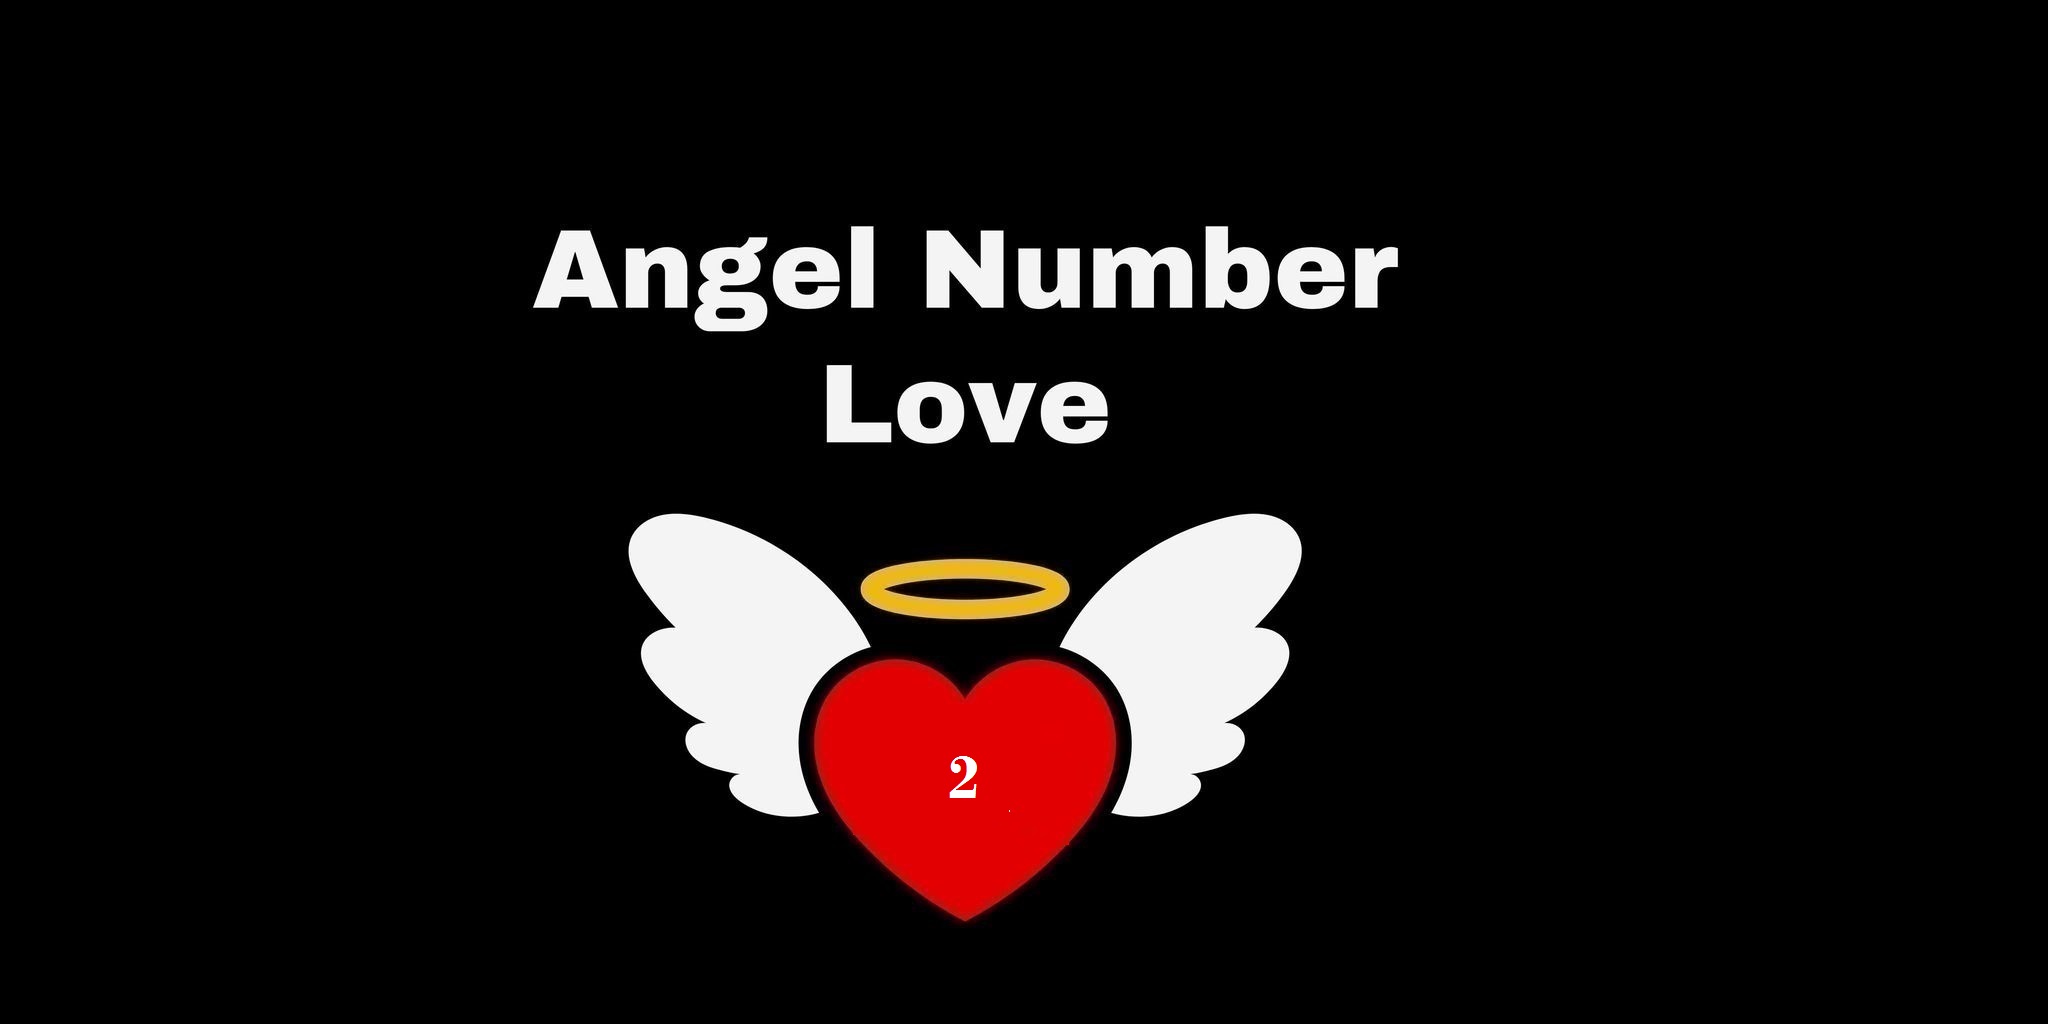 2 Angel Number Meaning In Love